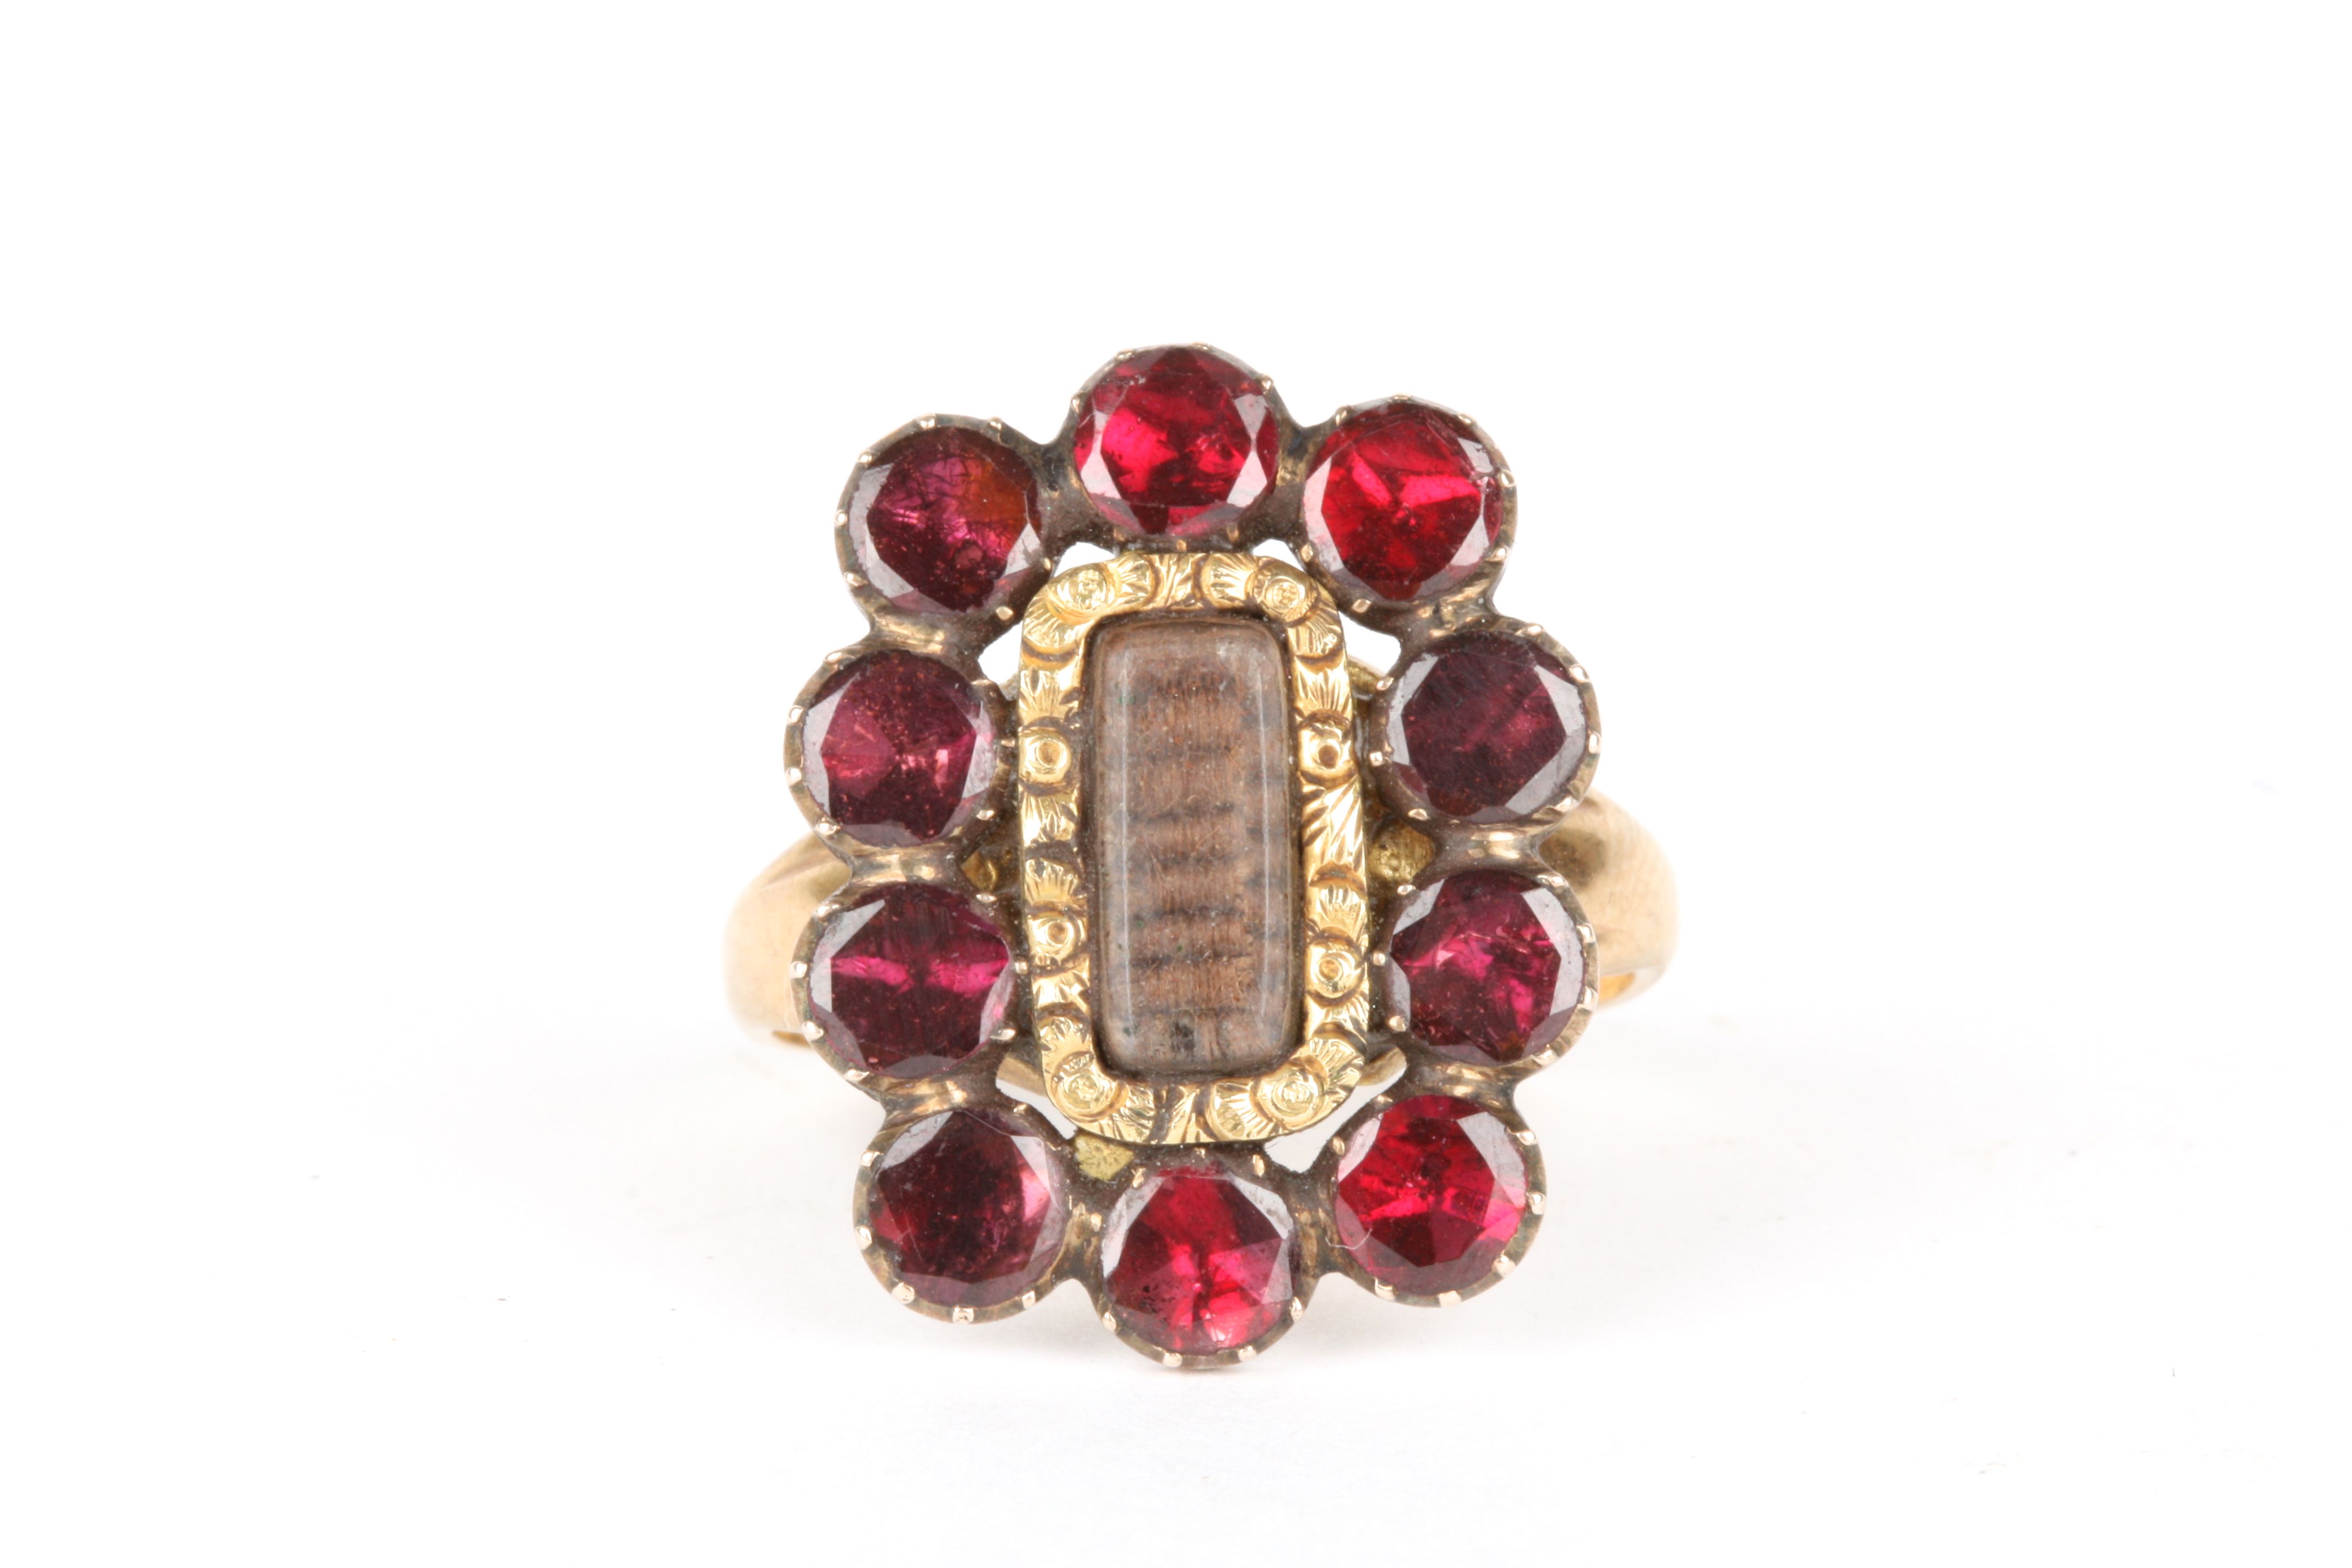 A gold and garnet mourning ring
set with a central panel of woven hair surrounded by ten faceted